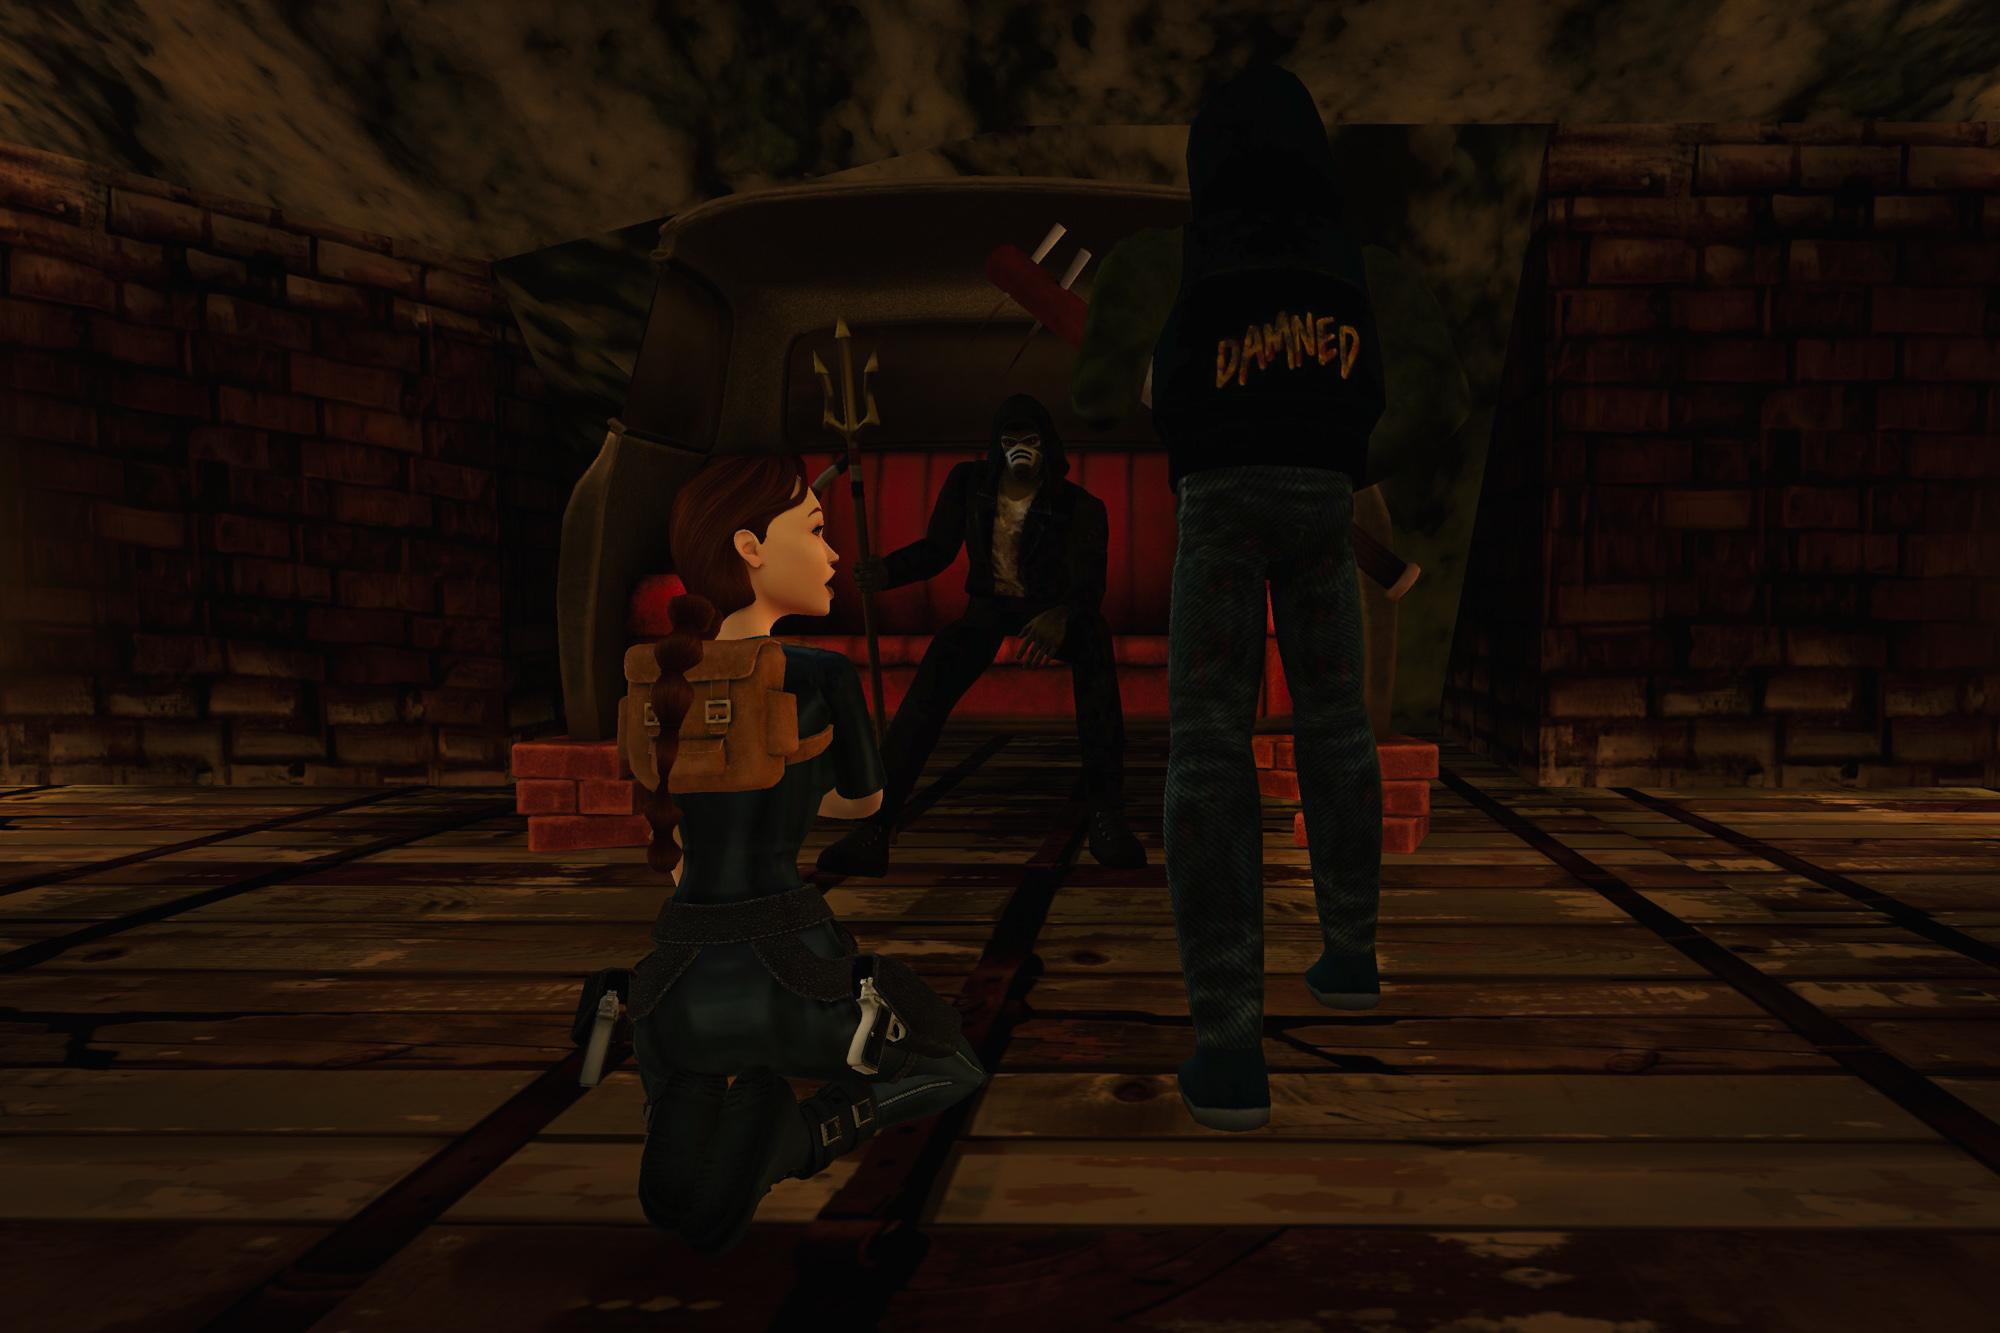 Geordie Bob sitting in his makeshift throne with one of the Damned members while Lara's kneeling on the floor.